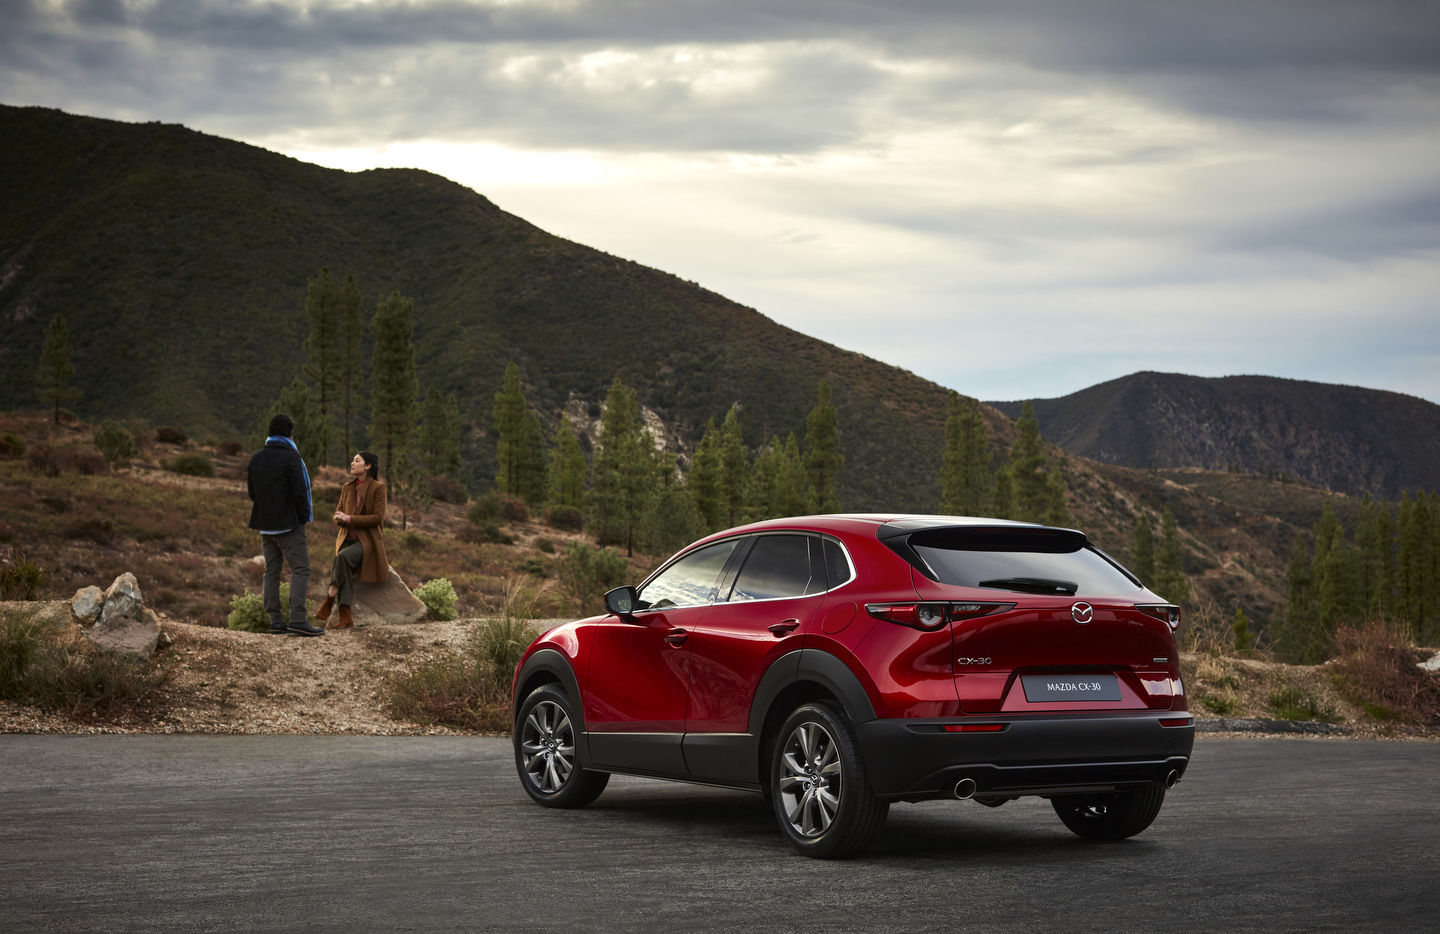 Improvements Made to the 2022 Mazda CX-30